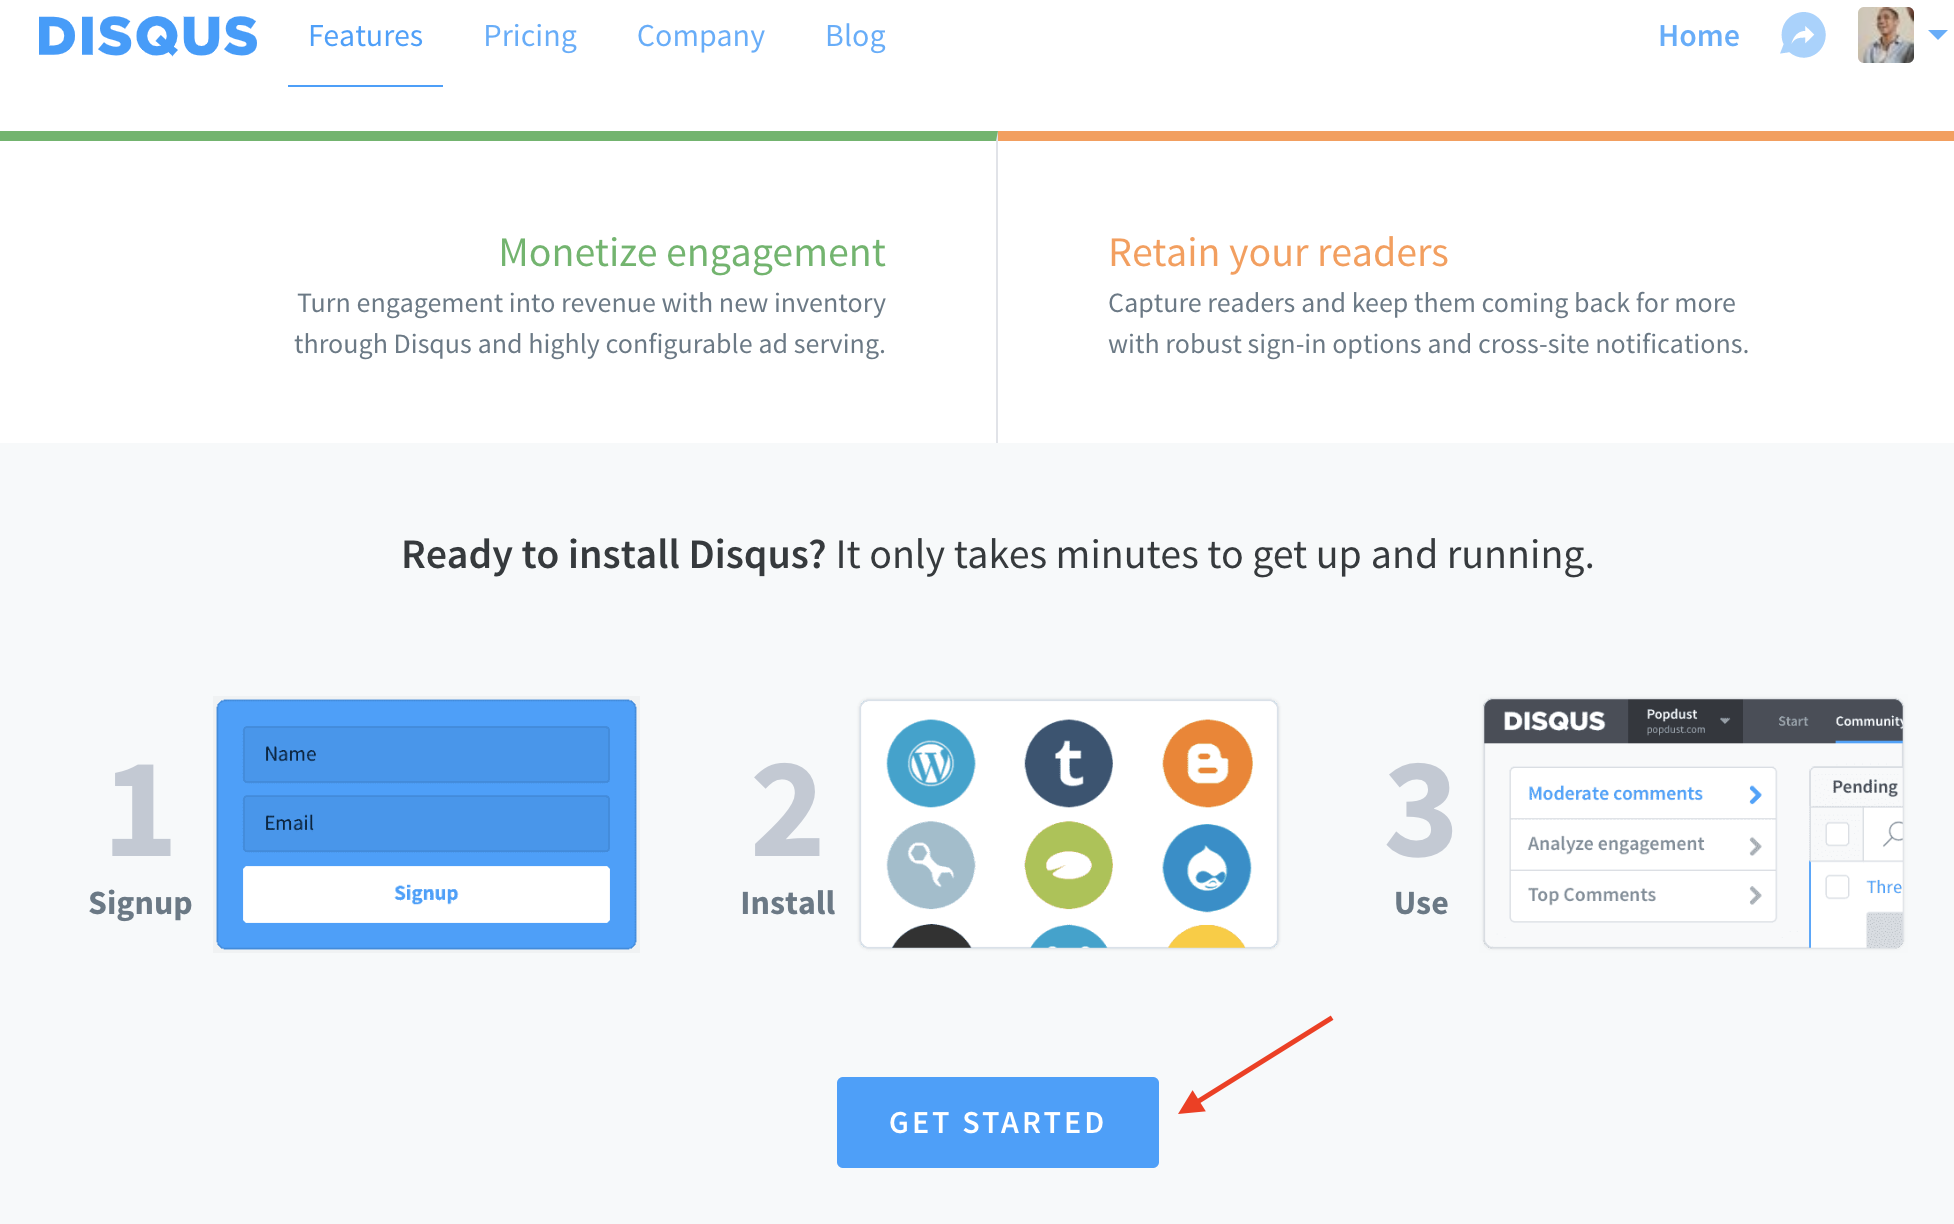 Disqus Features Page